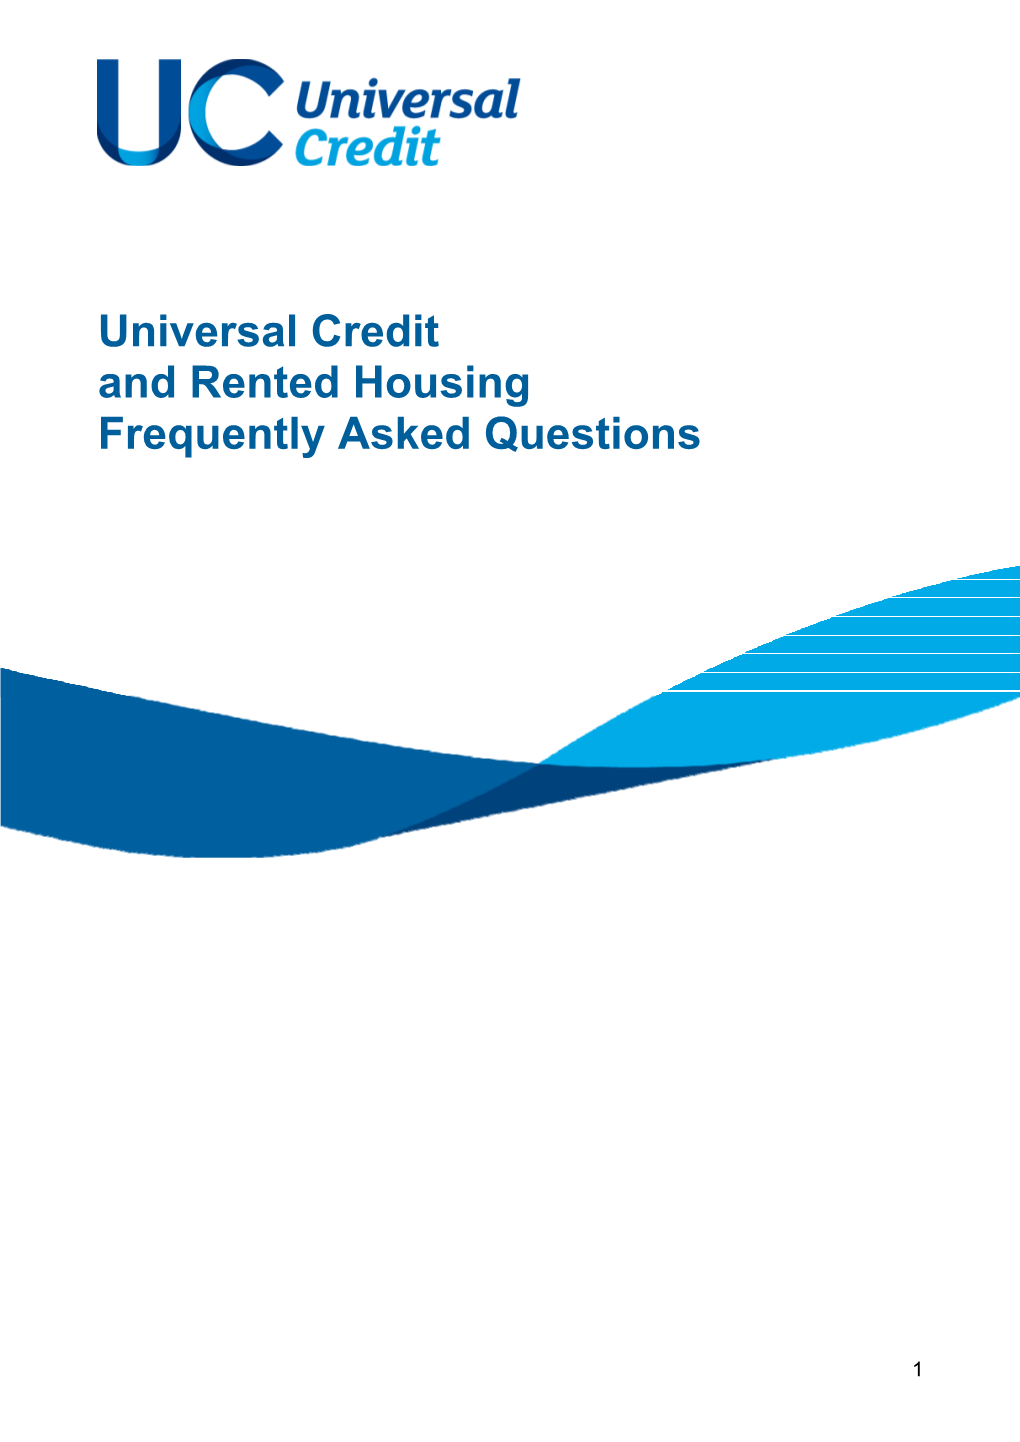 Universal Credit and Rented Housing: Frequently Asked Questions